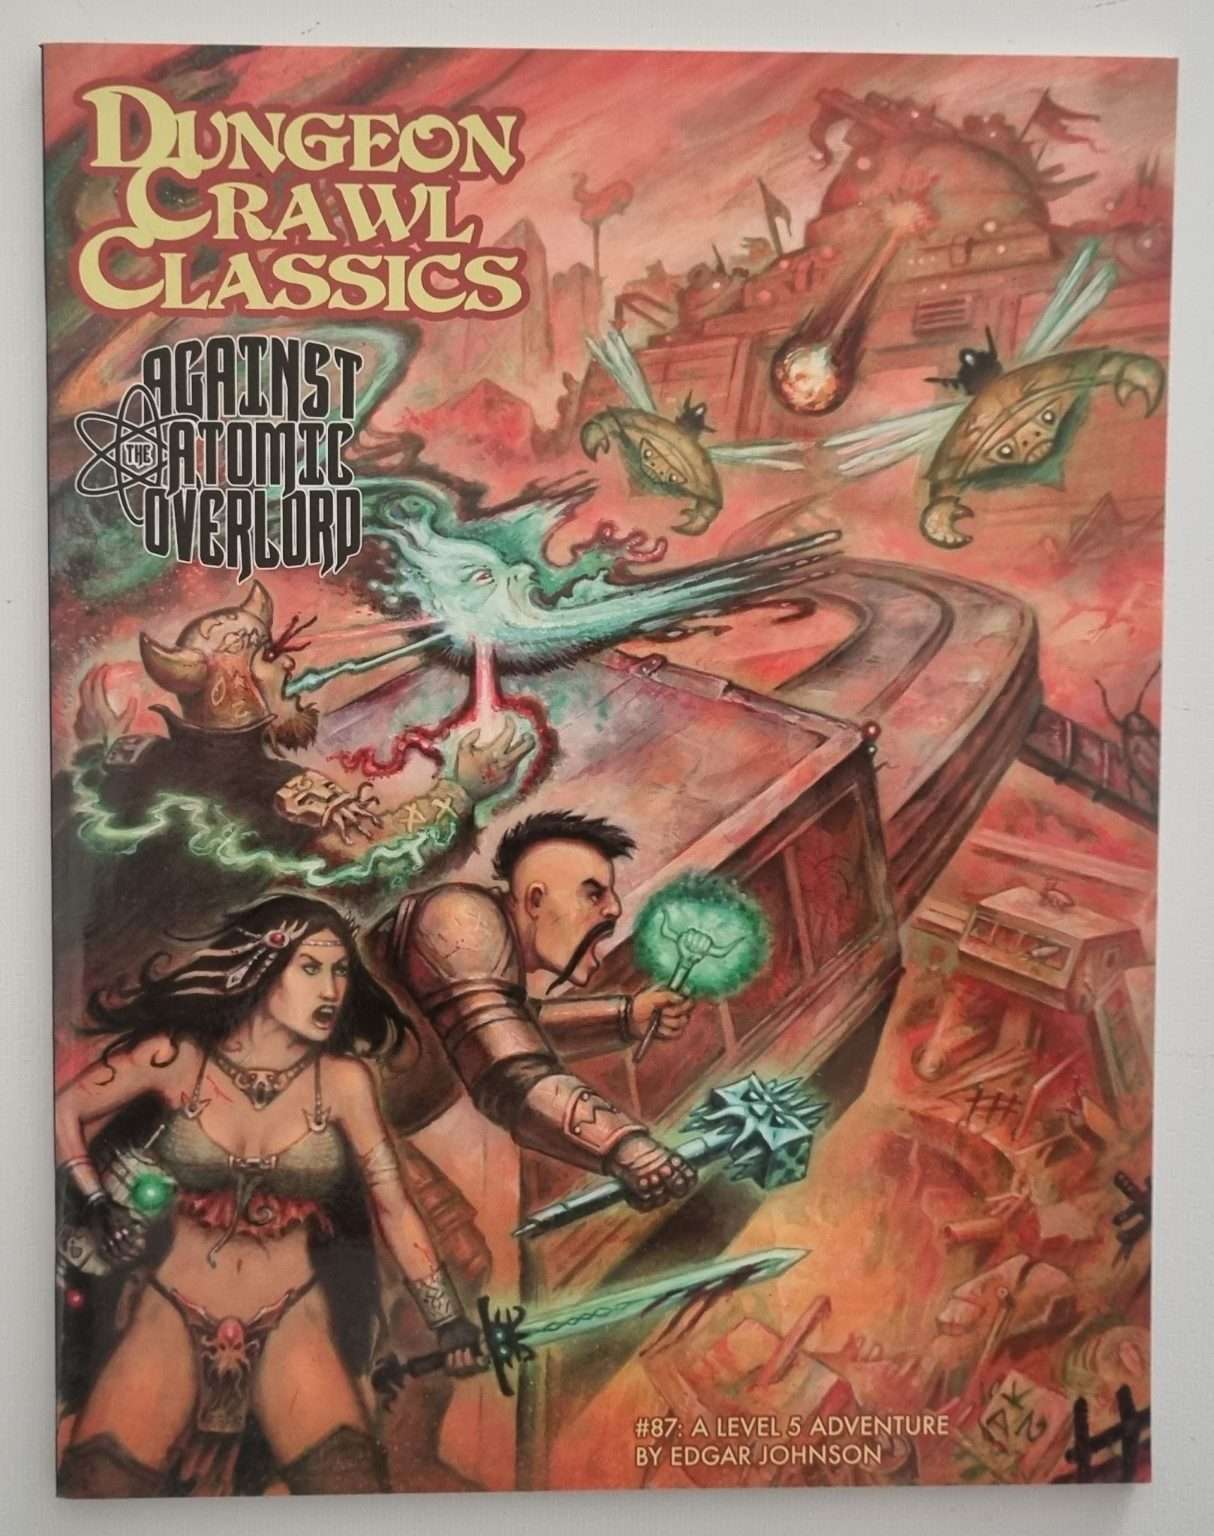 Dungeon Crawl Classics: Against the Atomic Overlord #87 Default Title